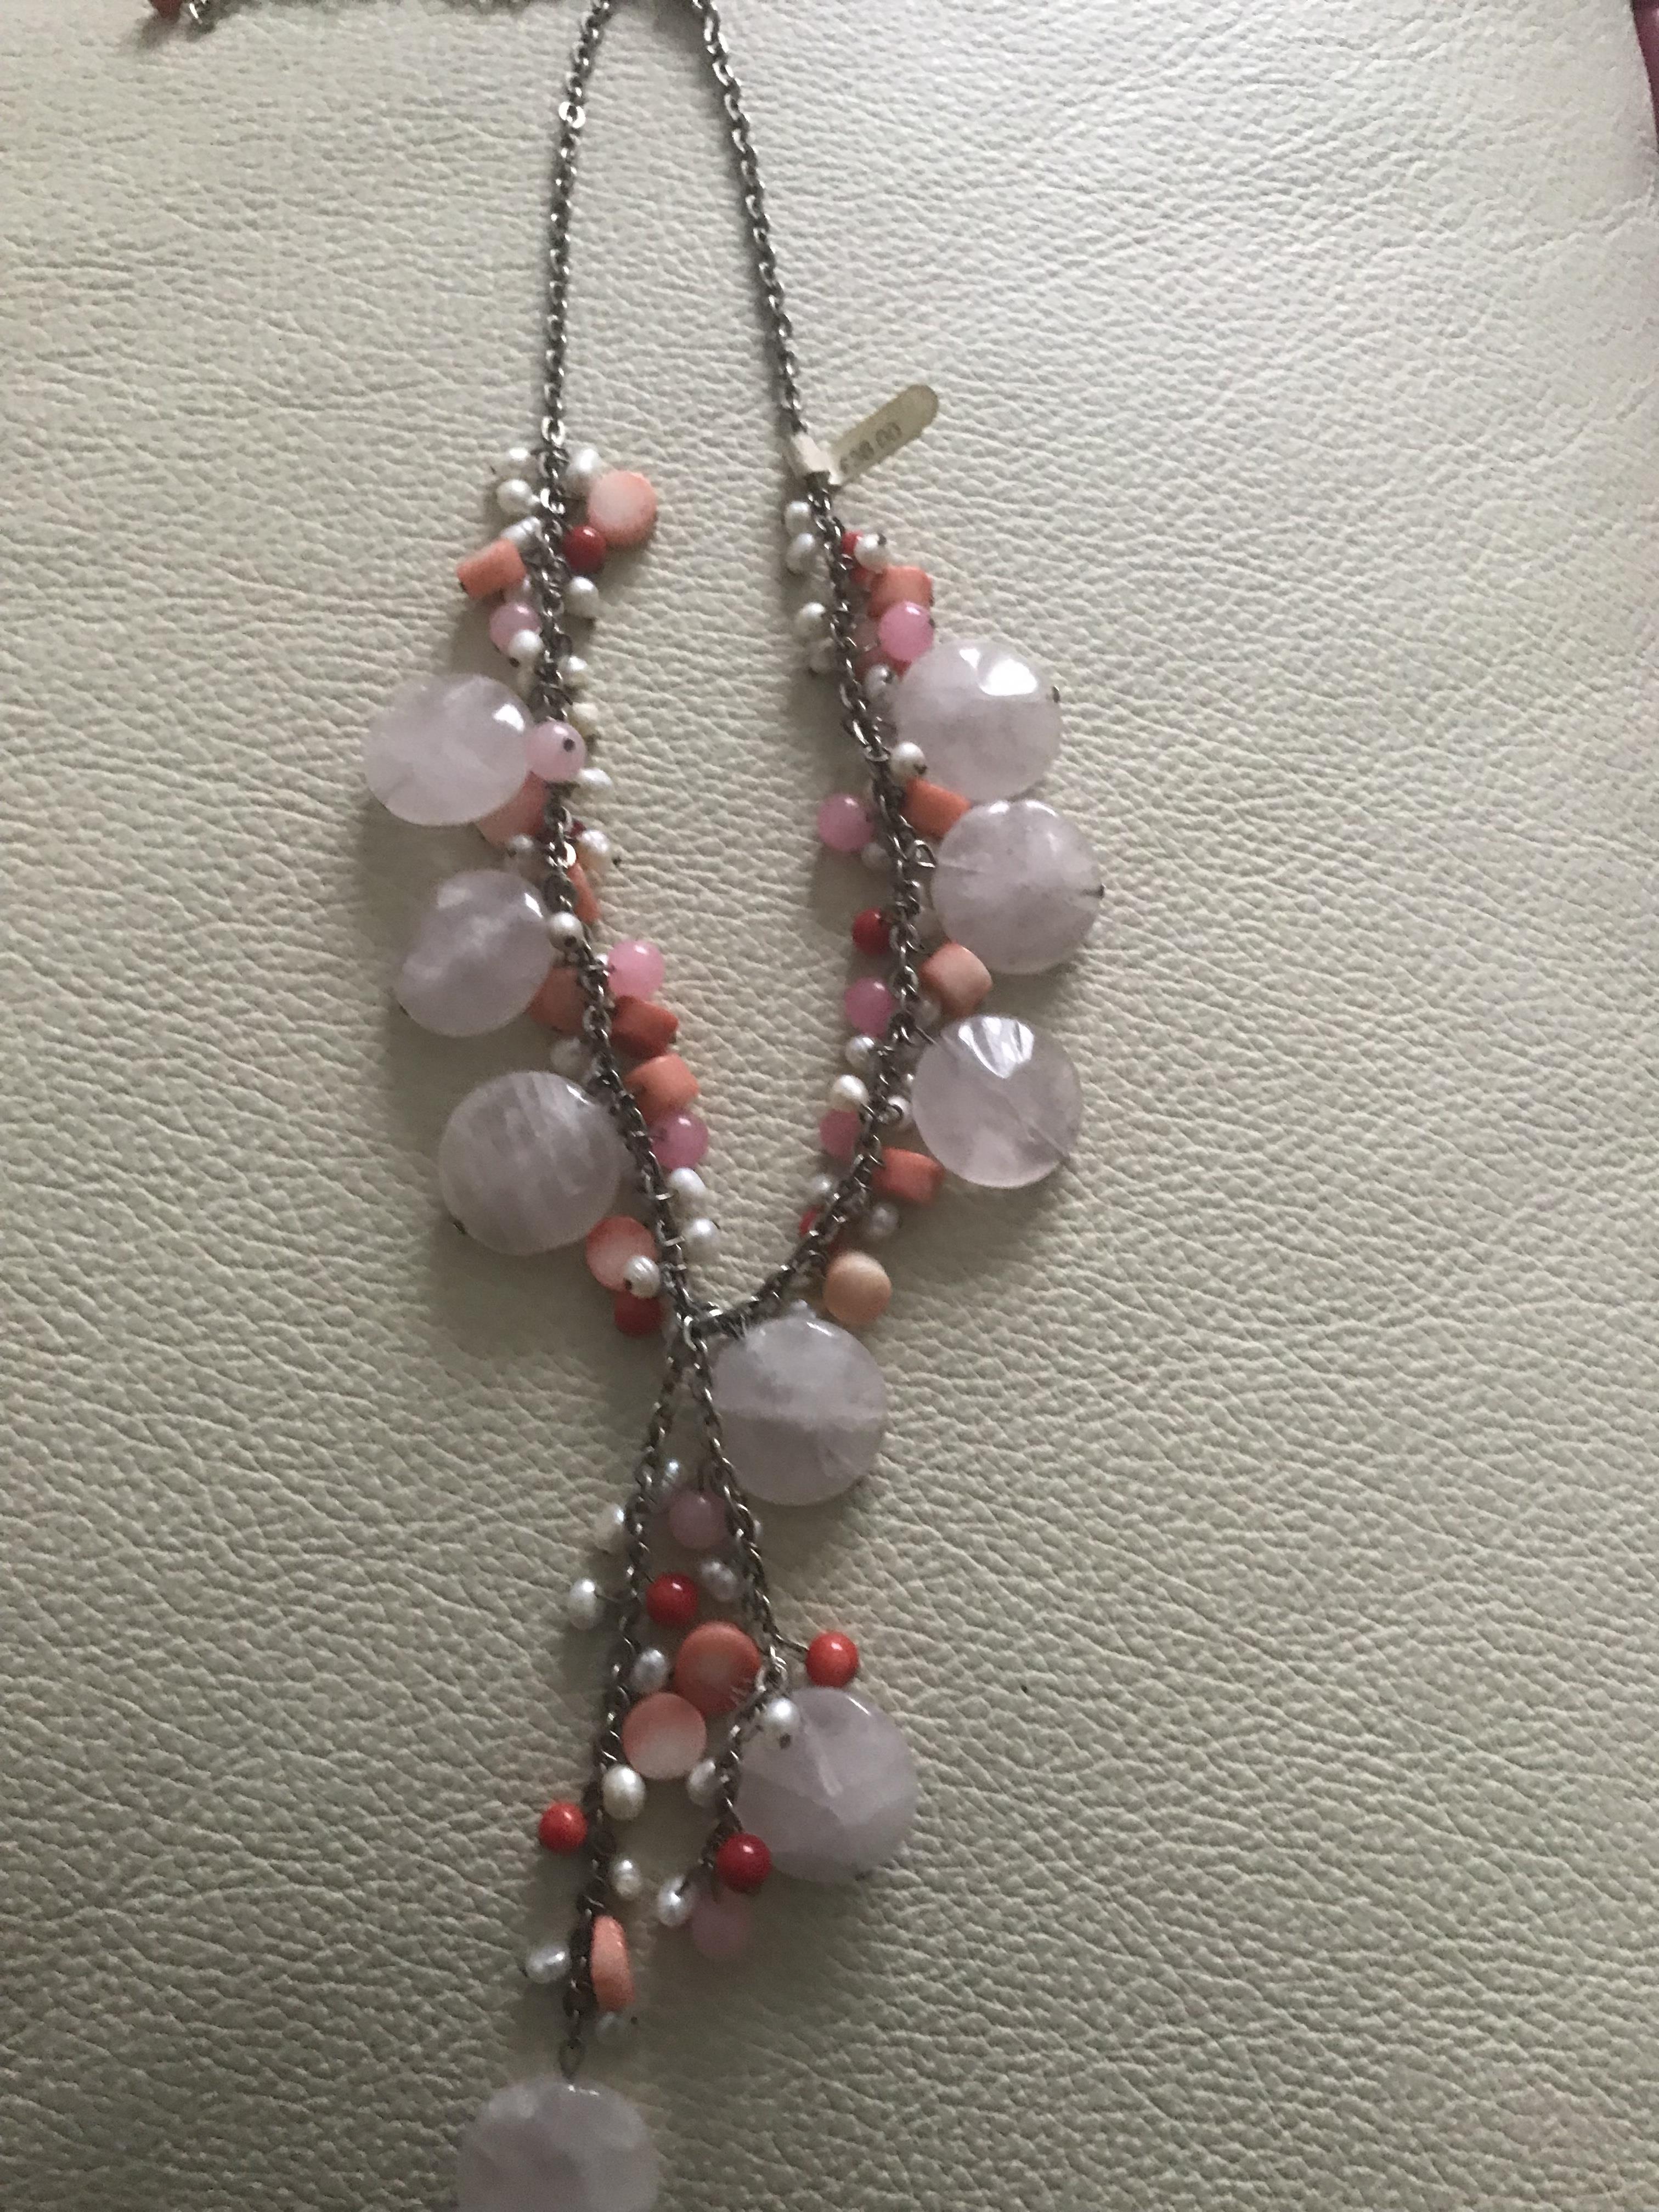 Butler & Wilson Rose Quartz, Pearl and Coral Bead Necklace - Image 2 of 5